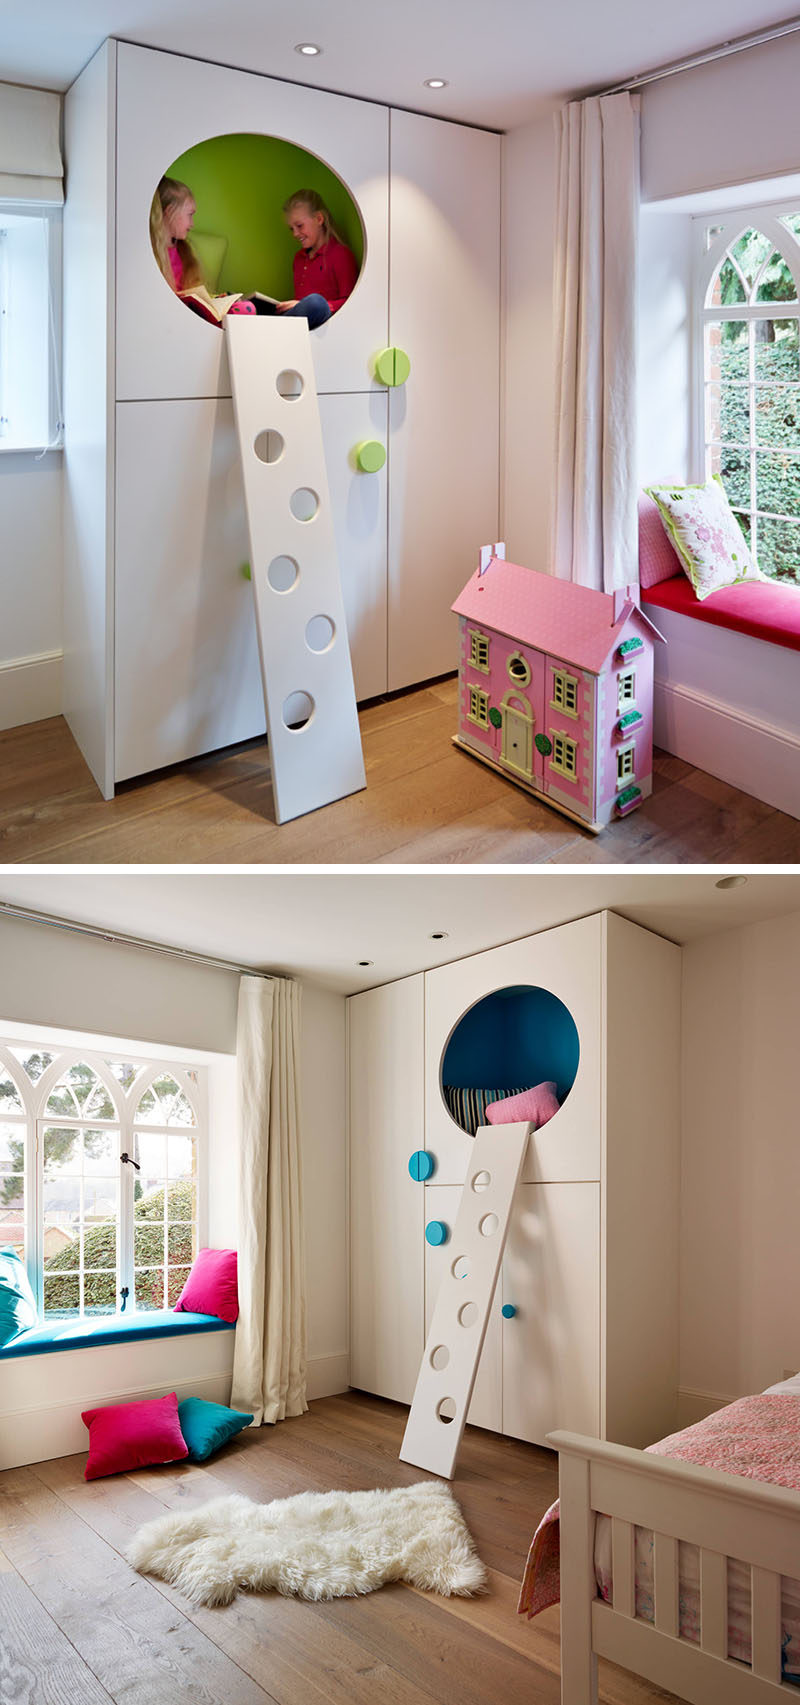 11 Kids Only Hideouts That Even The Biggest Grownups Would Be Jealous Of // These hideouts which are large enough for two, also have closet space.